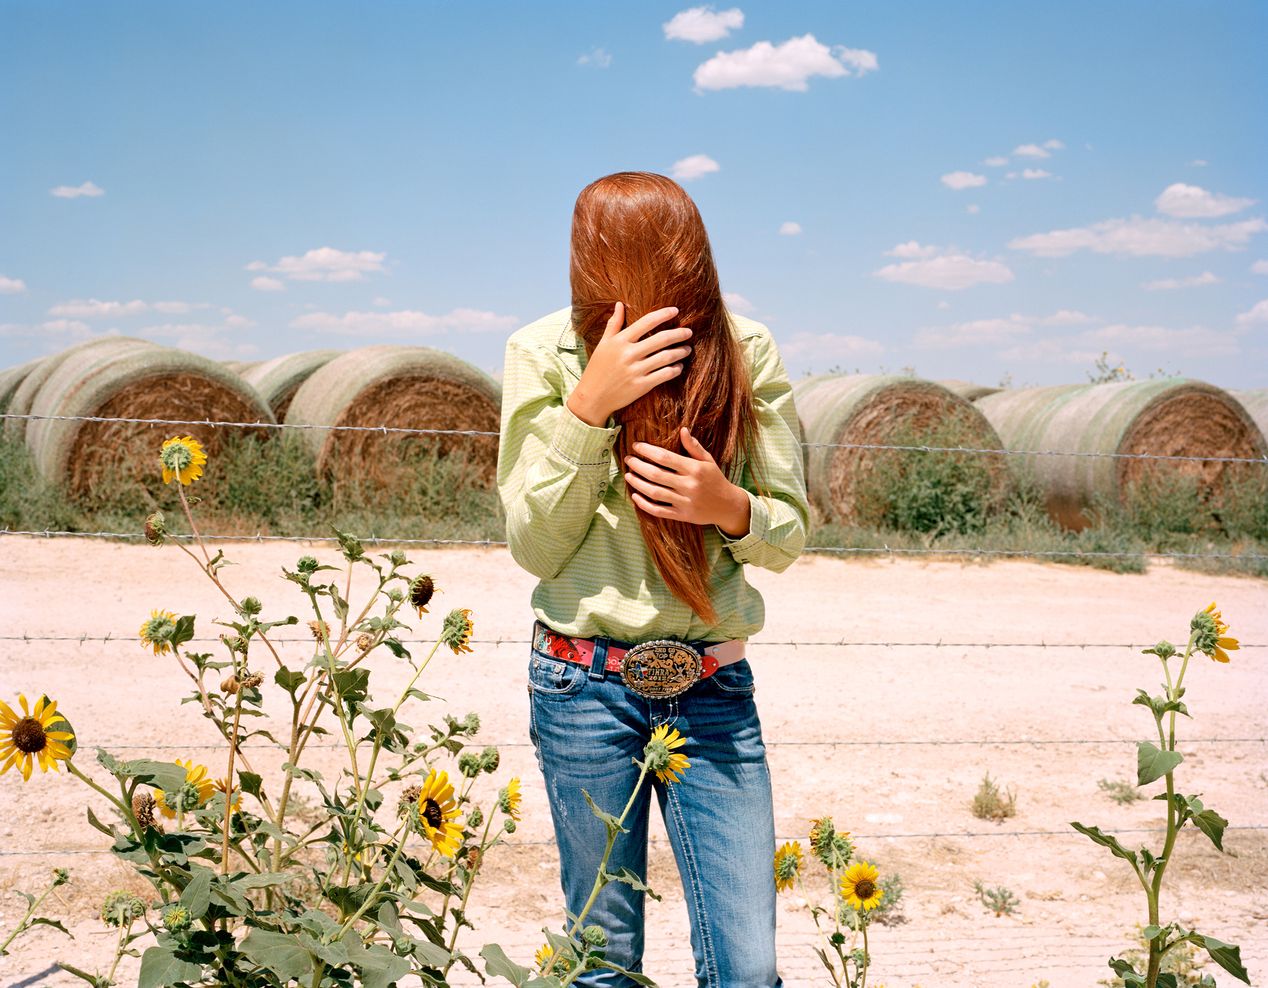 Teenage girl touching her hair, standing in the field, environmental portrait photography, Ilona Szwarc, contemporary Los Angeles artist.